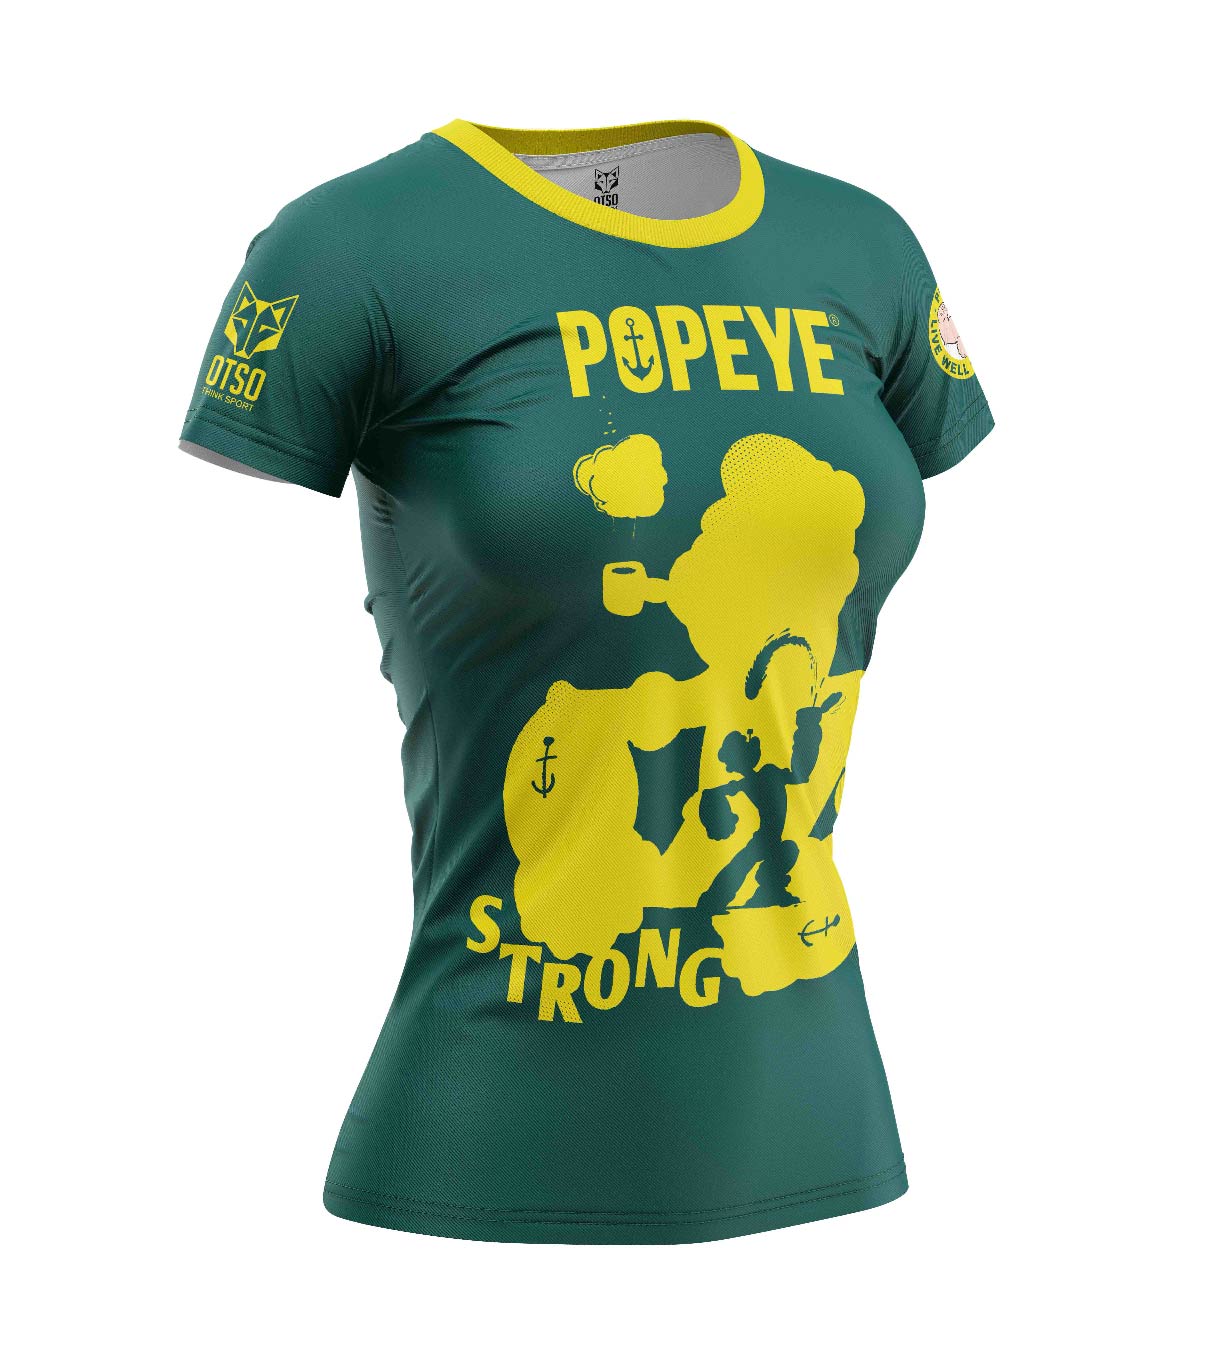 T-shirt manches courtes femme - Popeye Strong